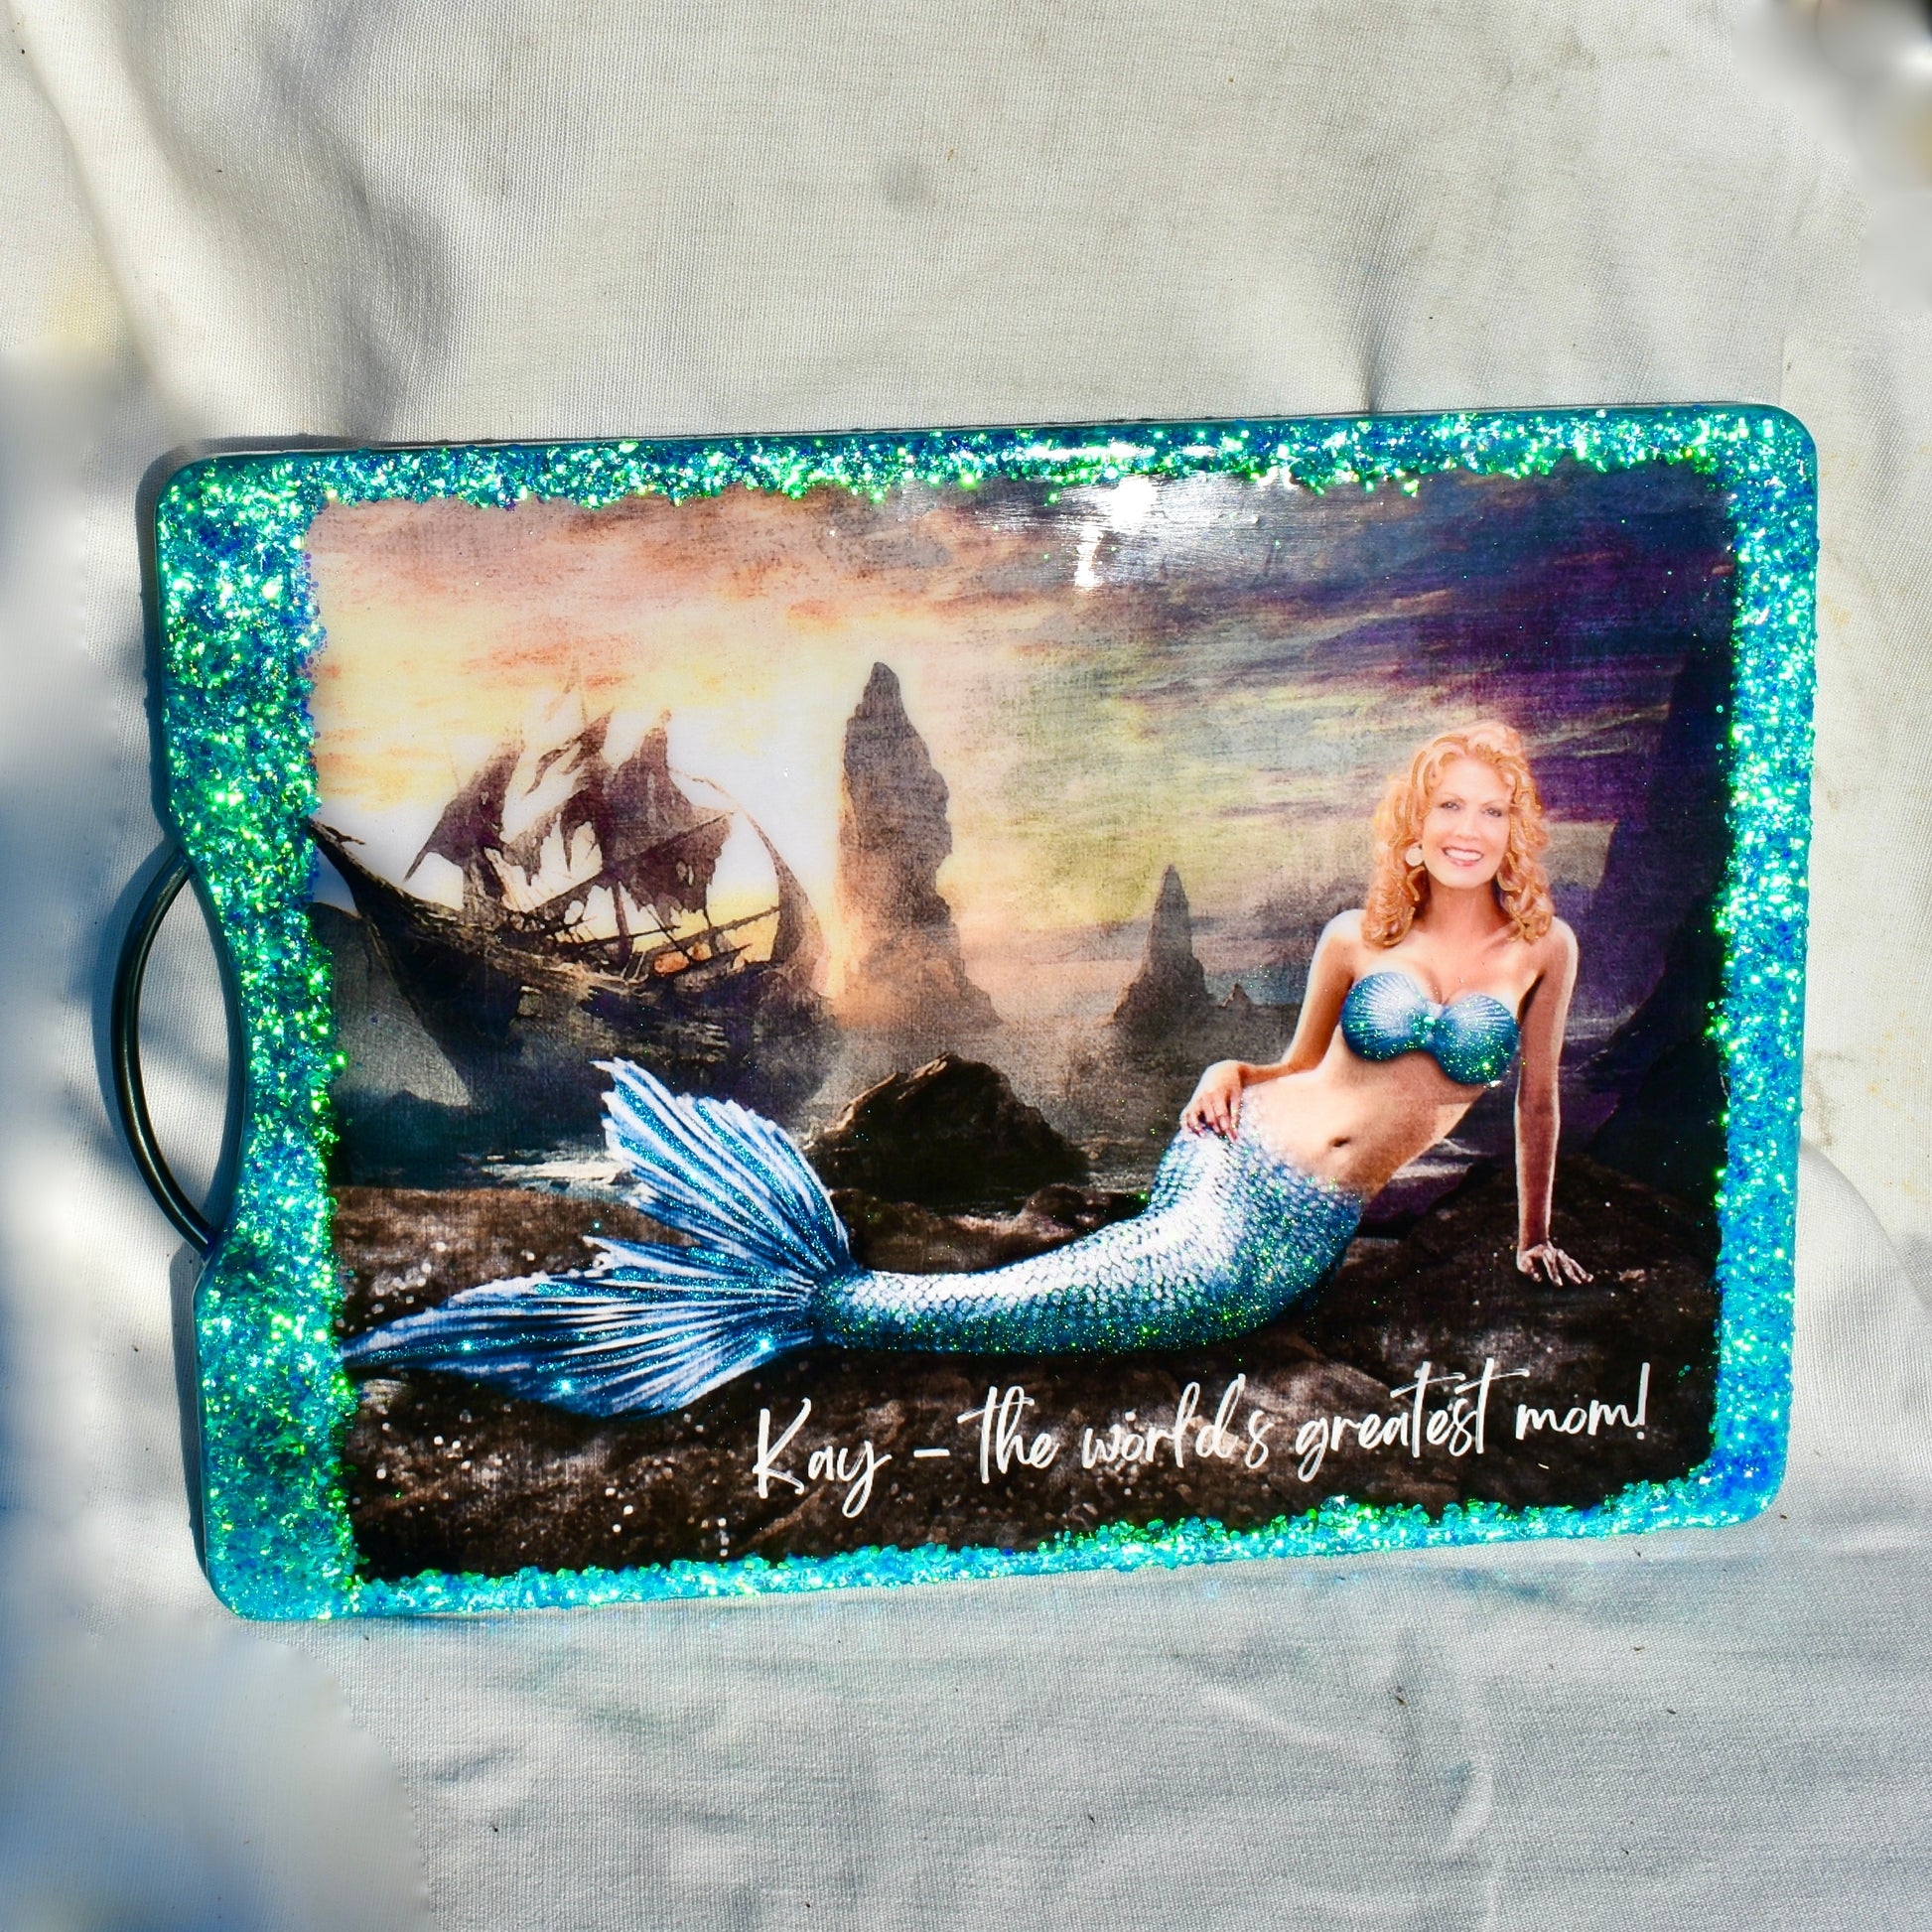 This custom charcuterie board features a  mermaid with a photo of the gift recipient.  The edges are embellished with holographic glitter.